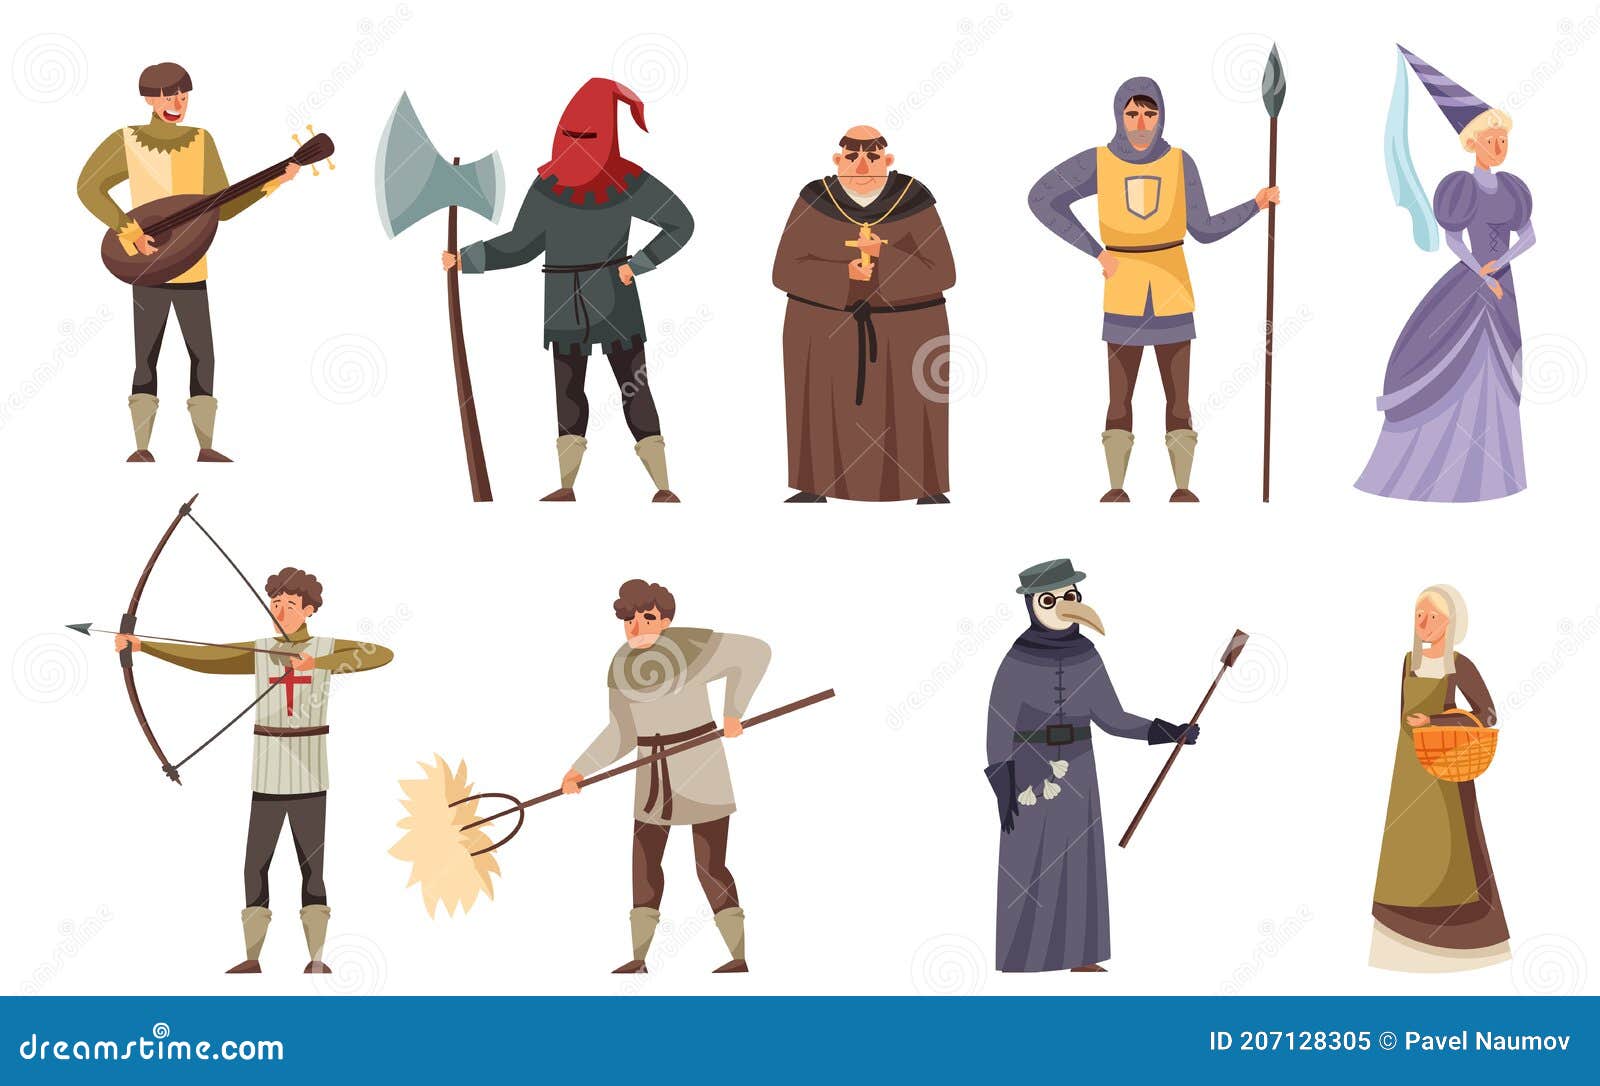 Medieval People Characters with Minstrel Holding Lute, Headsman and